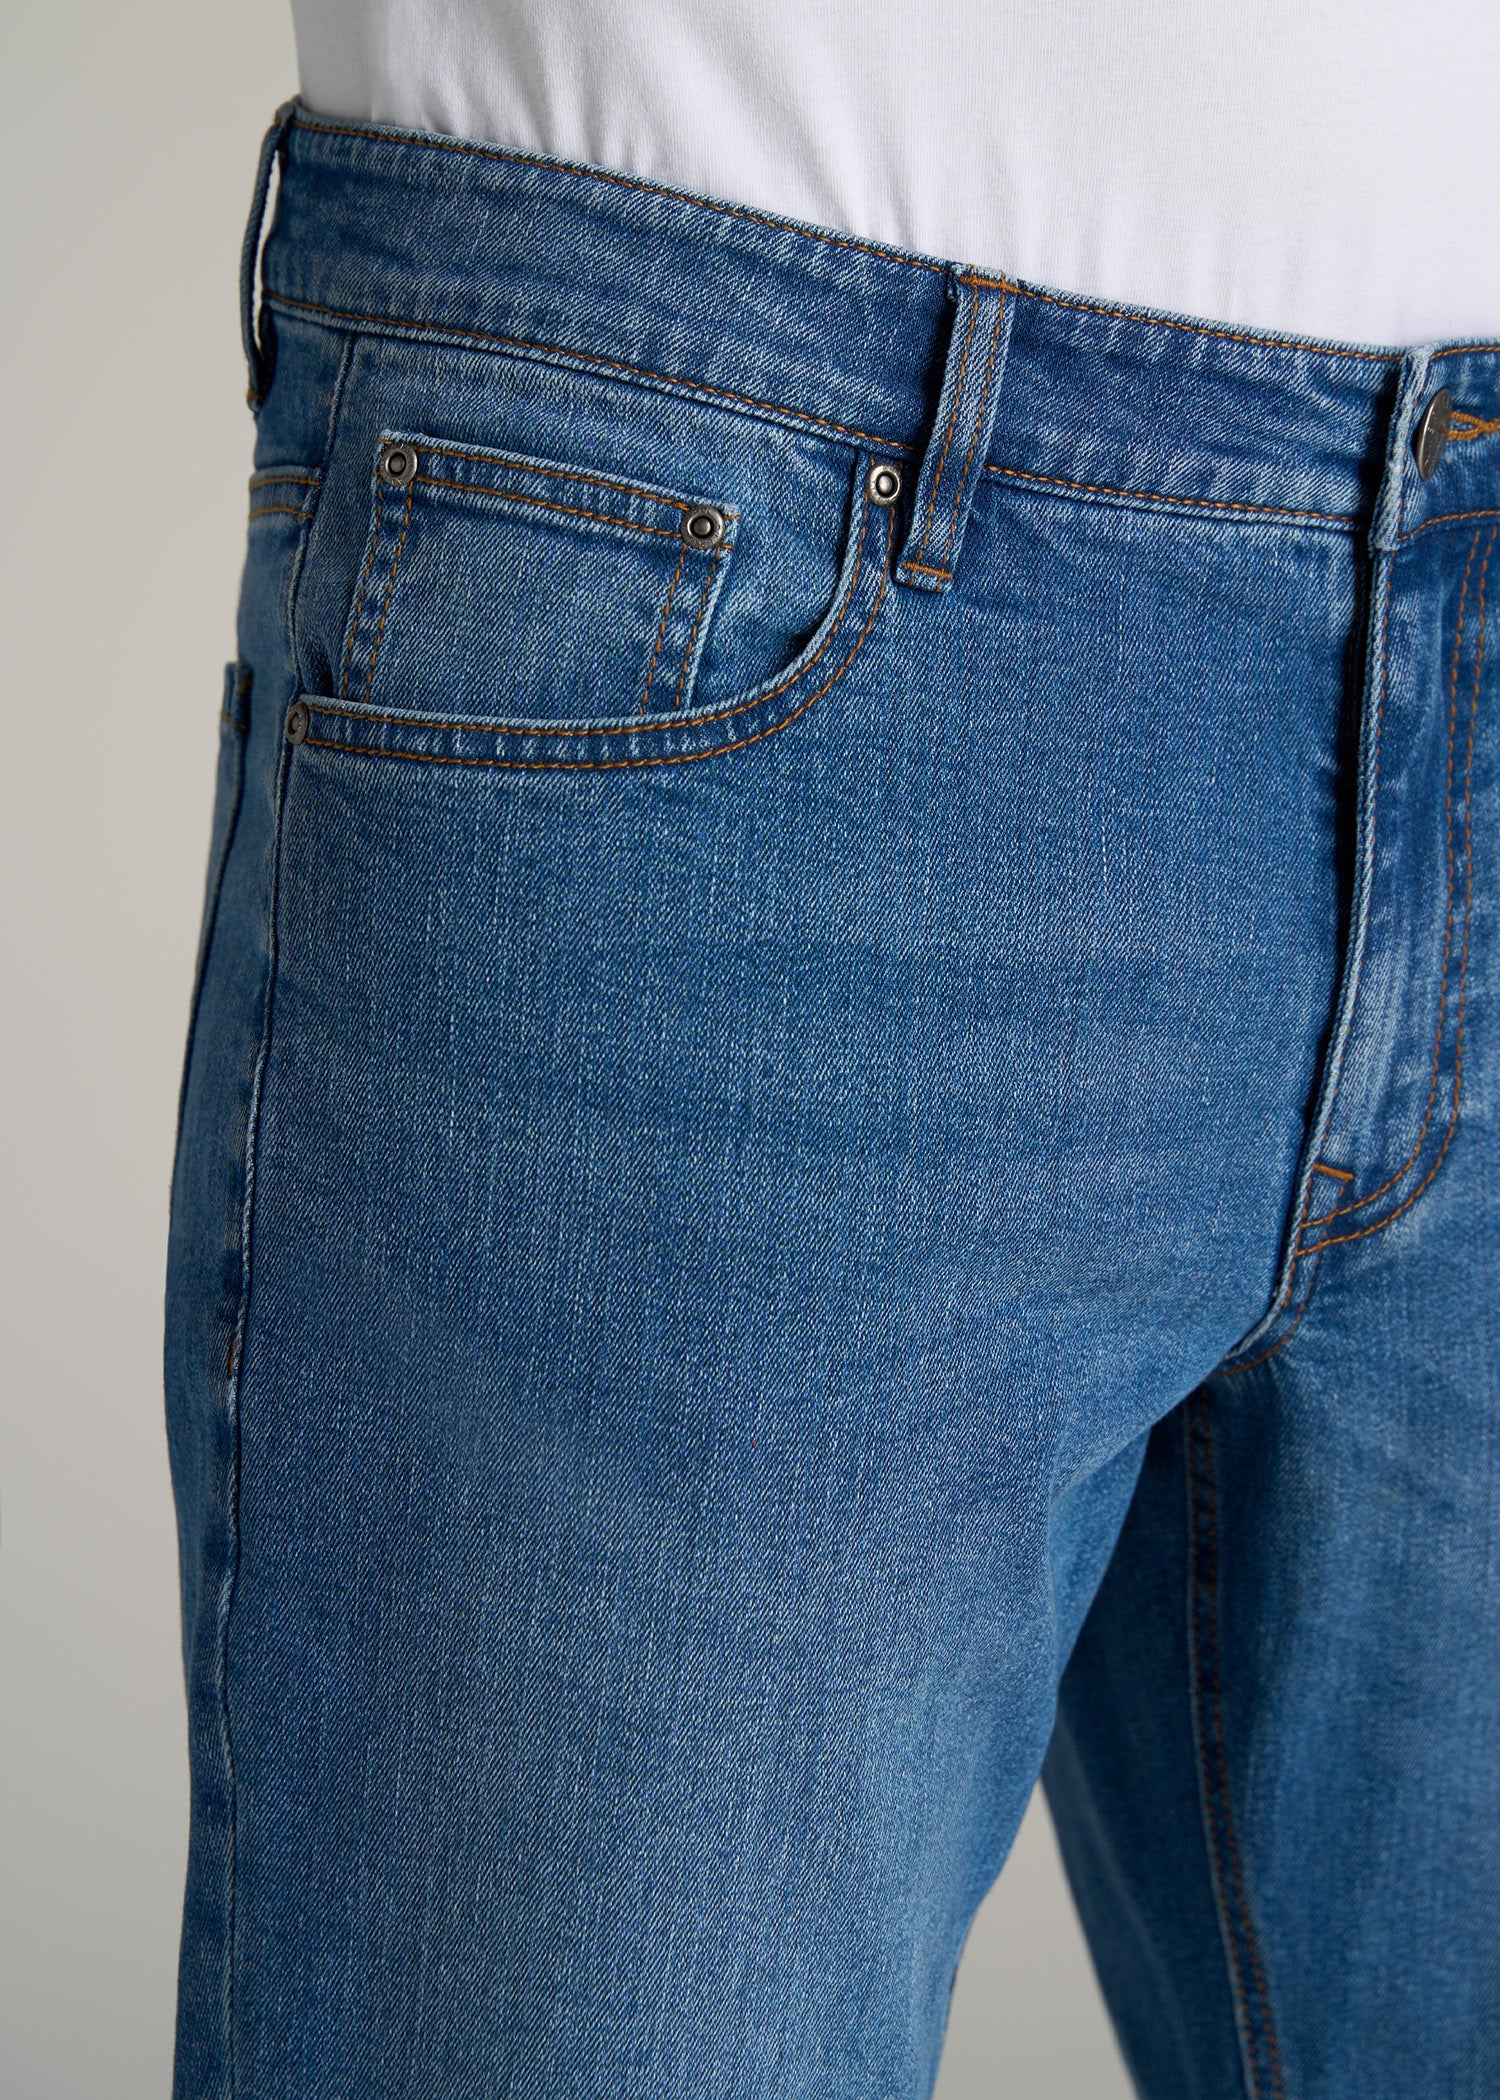 Carman TAPERED Jeans for Tall Men in Vintage Faded Blue